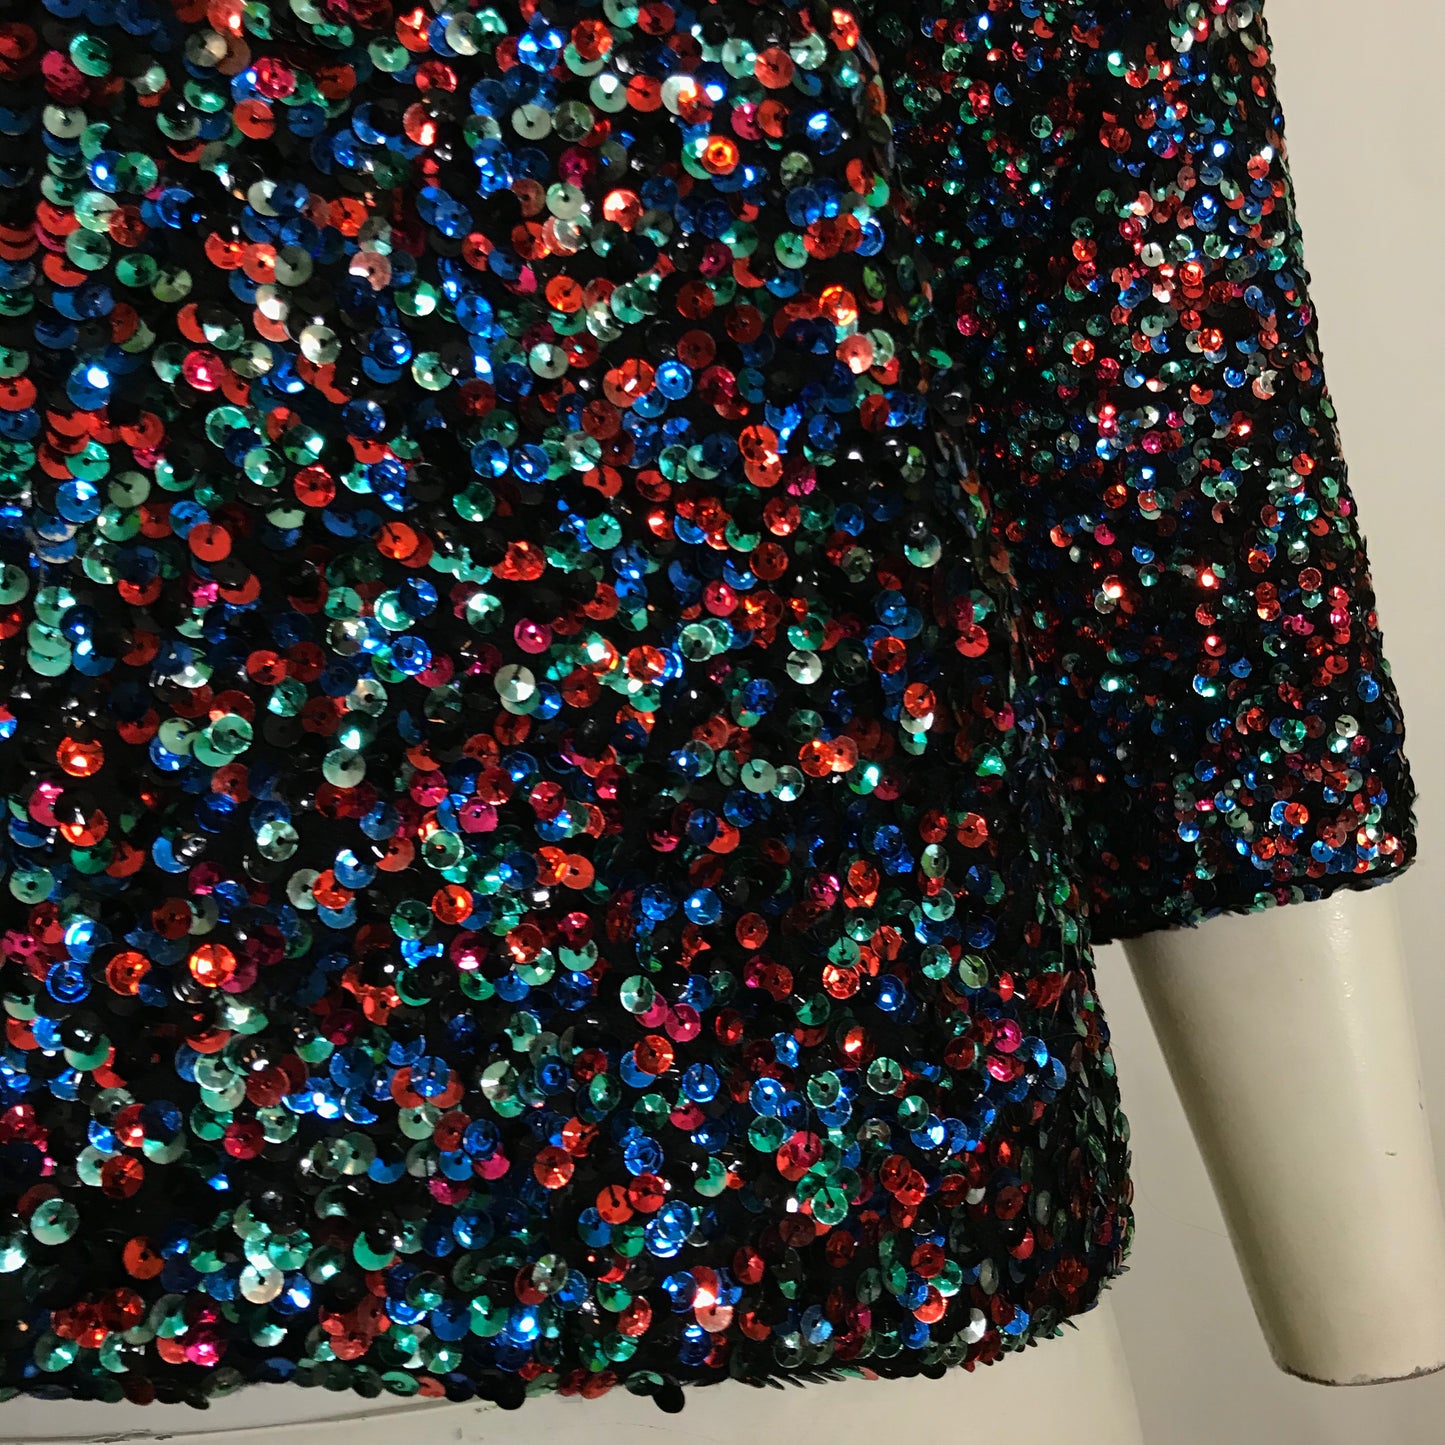 Fireworks! Glittering Red, Blue and Green Sequined Black Sweater circa 1960s